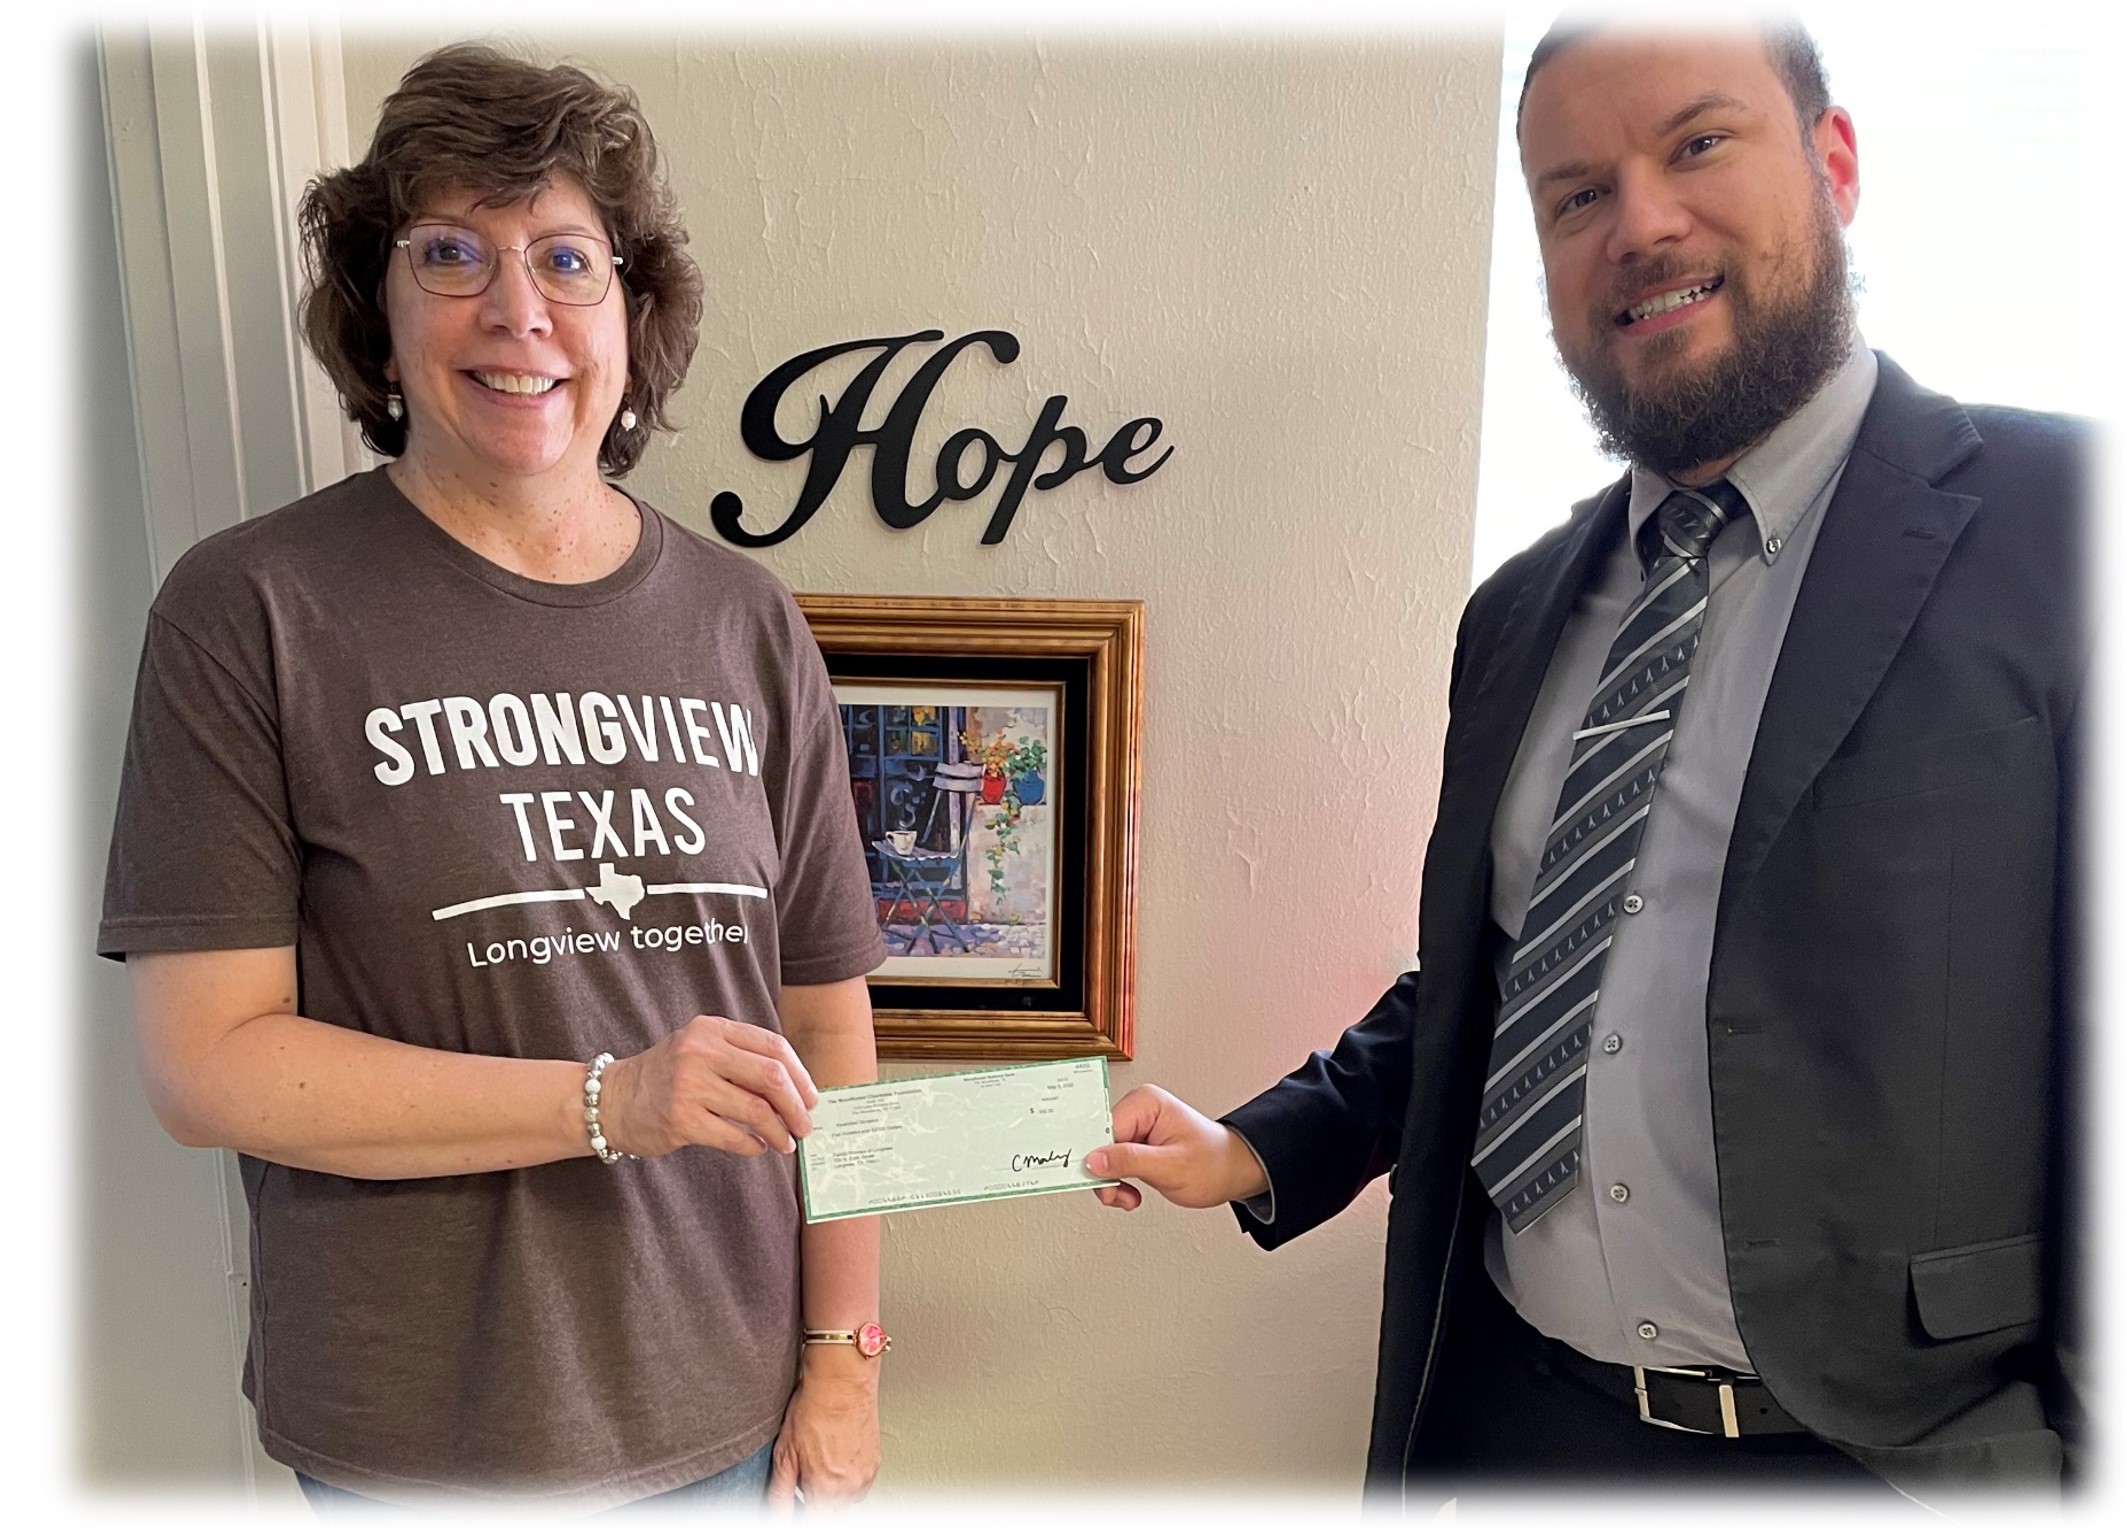 Family Promise of Longview recently received a $500 donation from WCF.